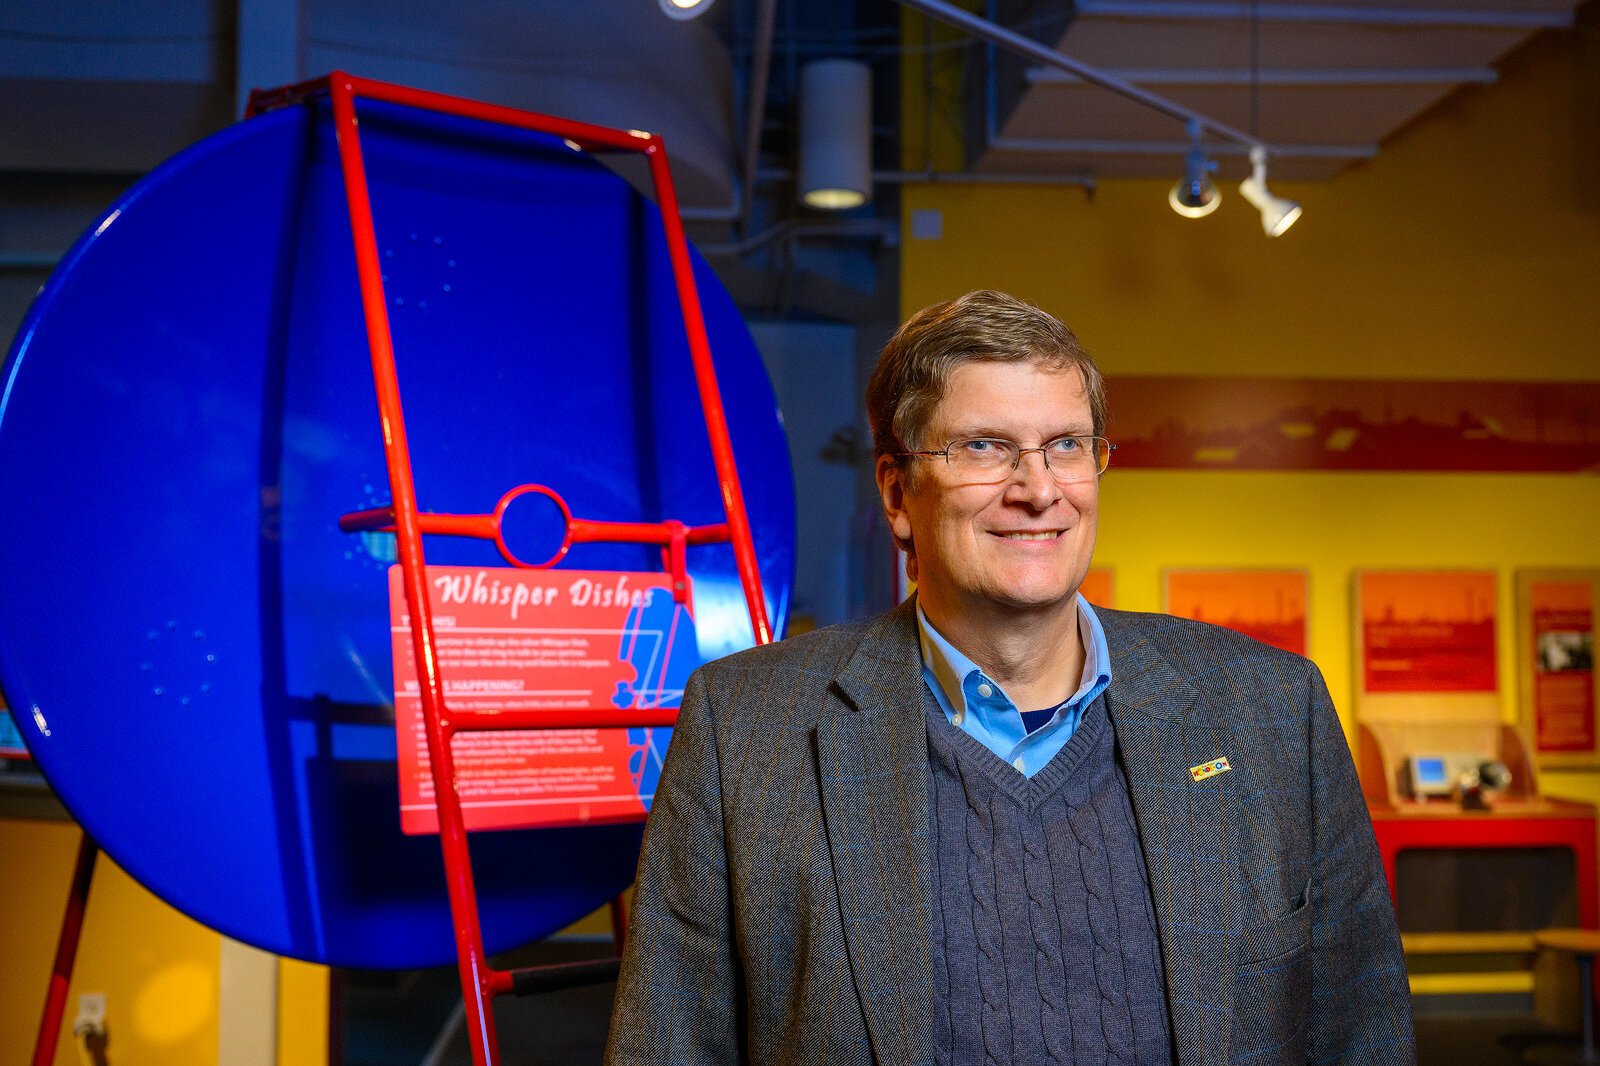 Ann Arbor Hands-On Museum President and CEO Mel Drumm.